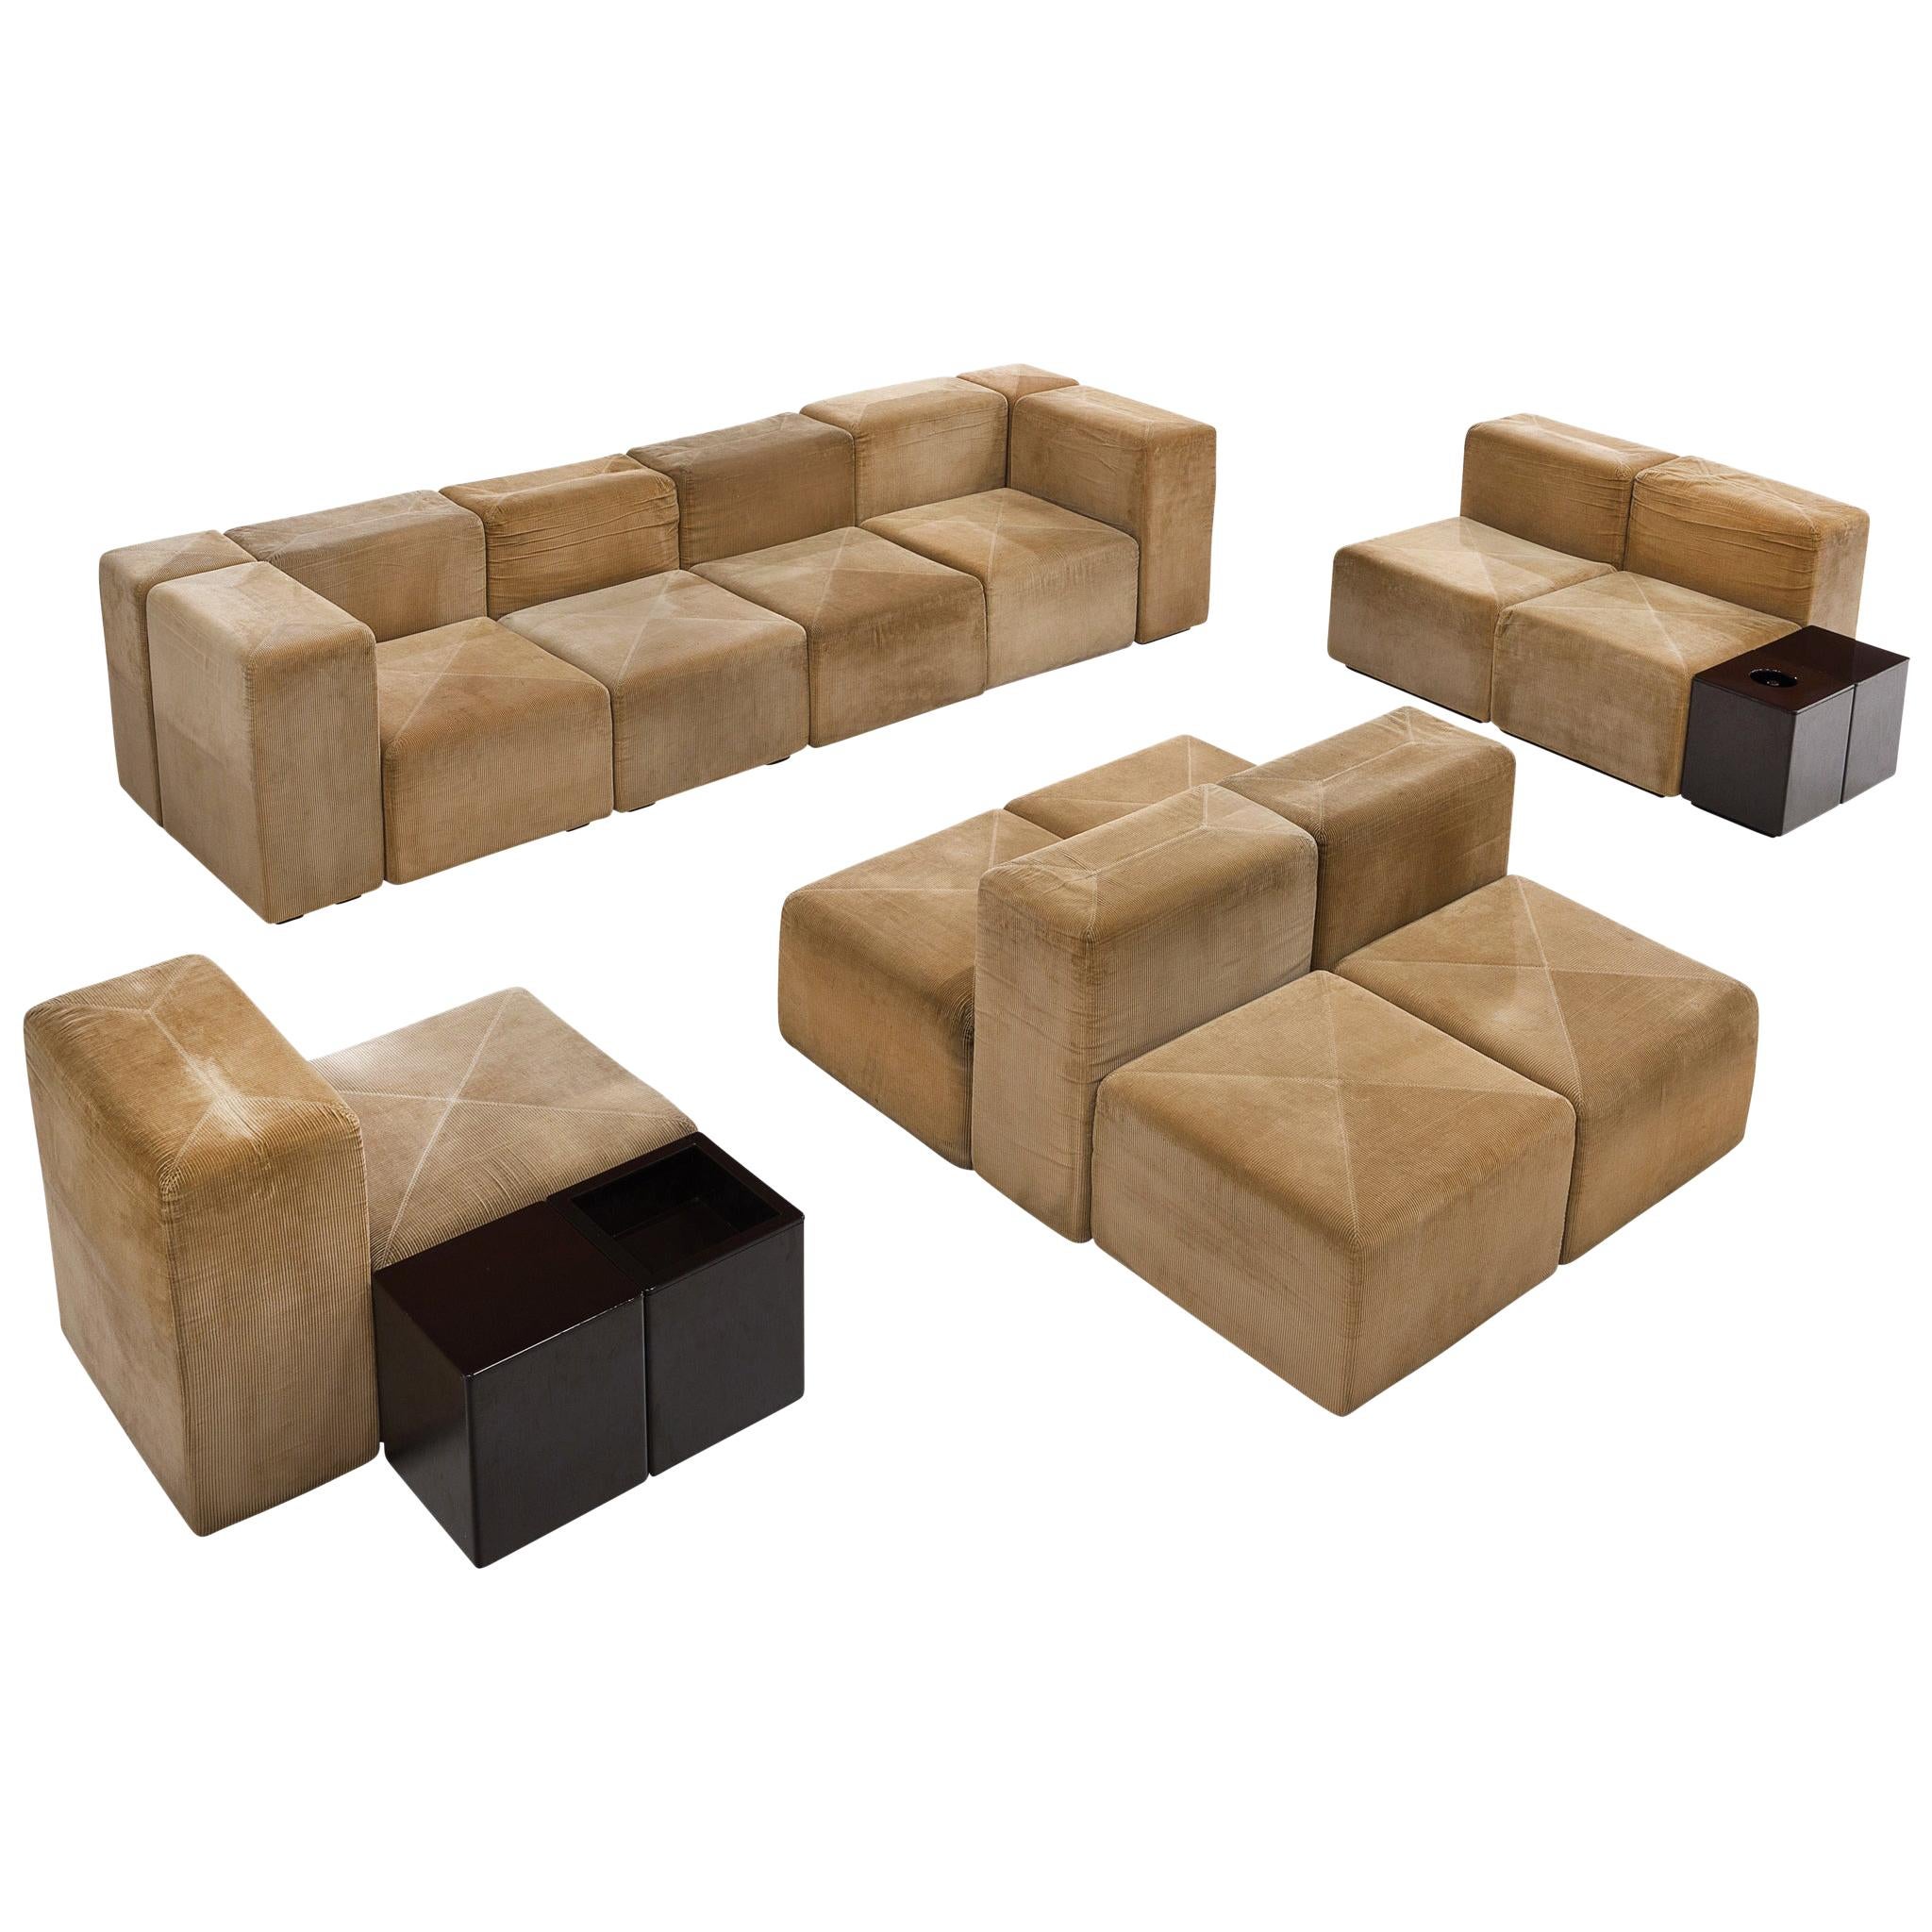 Anonima Castelli Large Sectional Sofa 'System 61' in Cord Upholstery